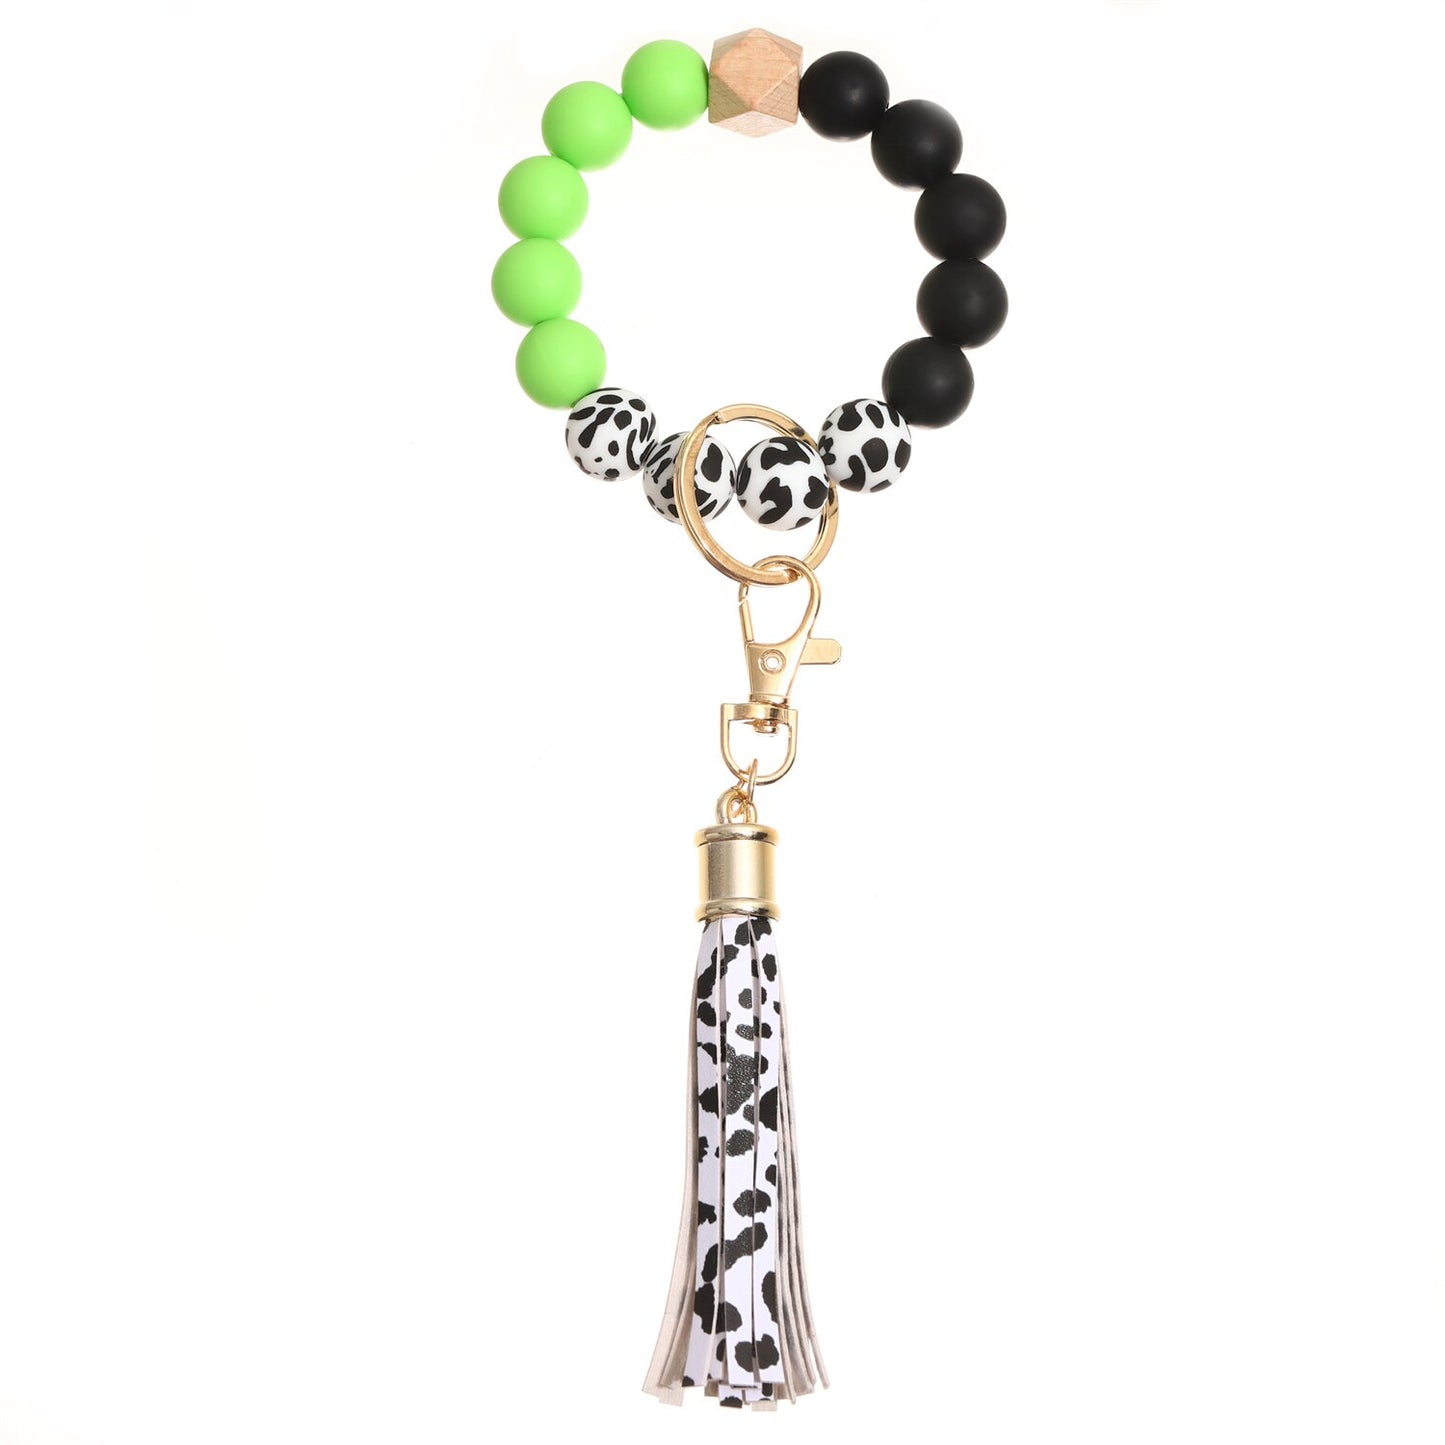 Trendy Silicone Beads Bracelets Bangles with Key Chain Candy Color Large Wristband Cuffs Beaded Bangle for Women